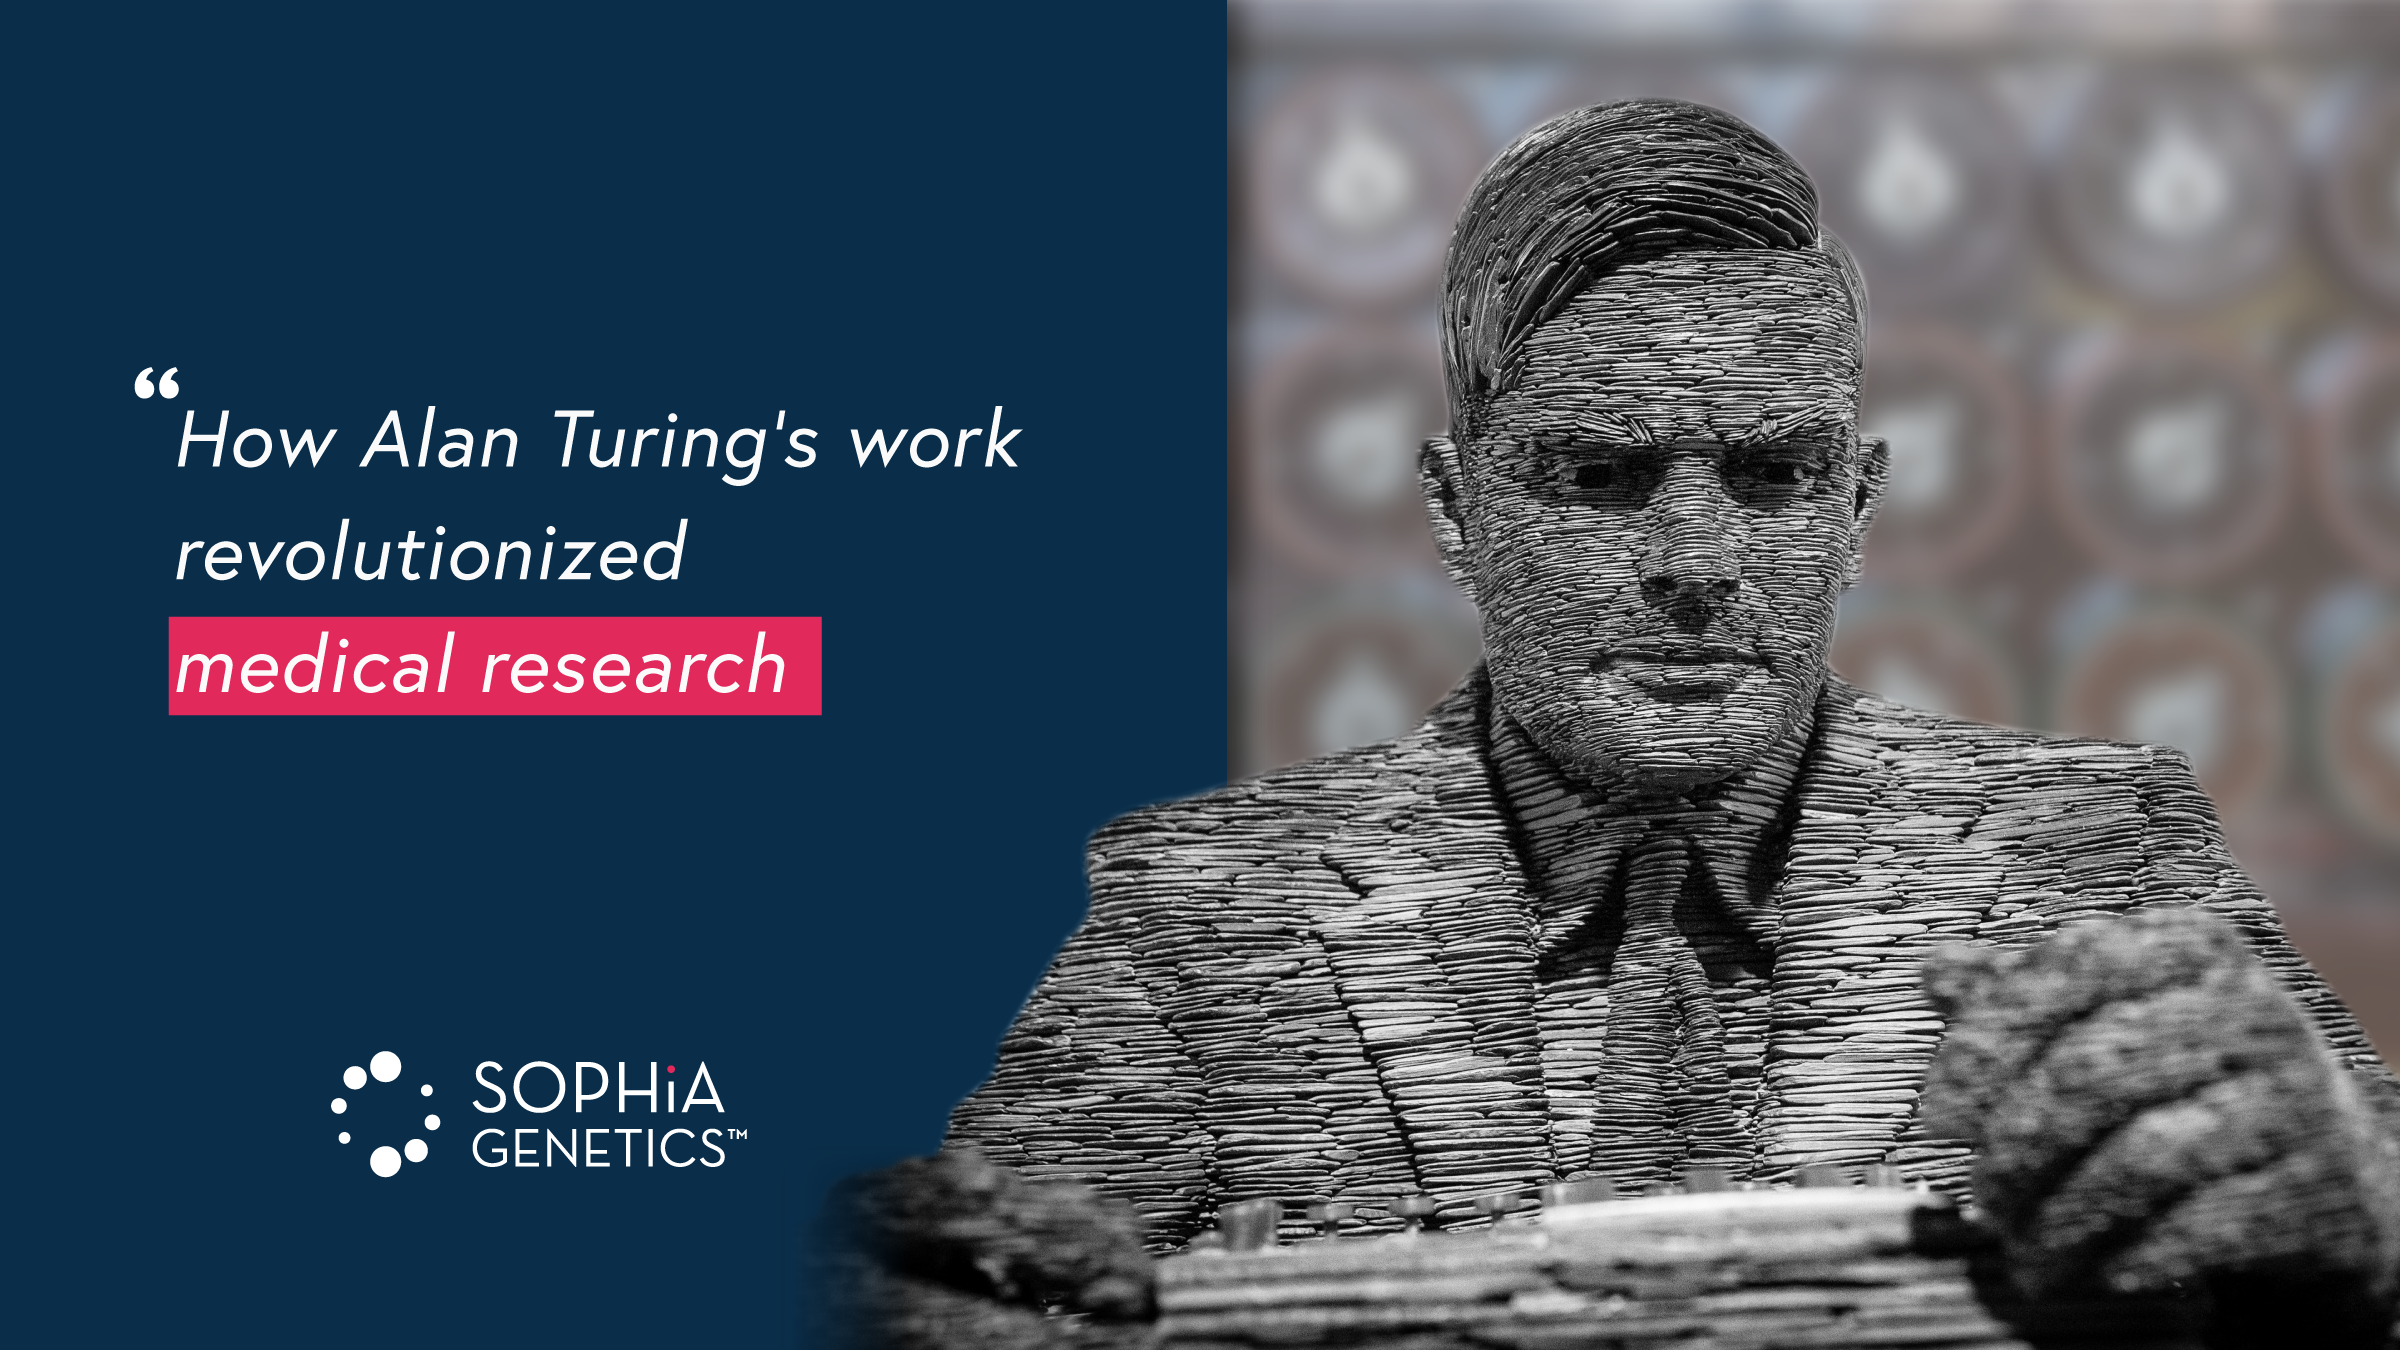 How Alan Turing’s work revolutionized medical research